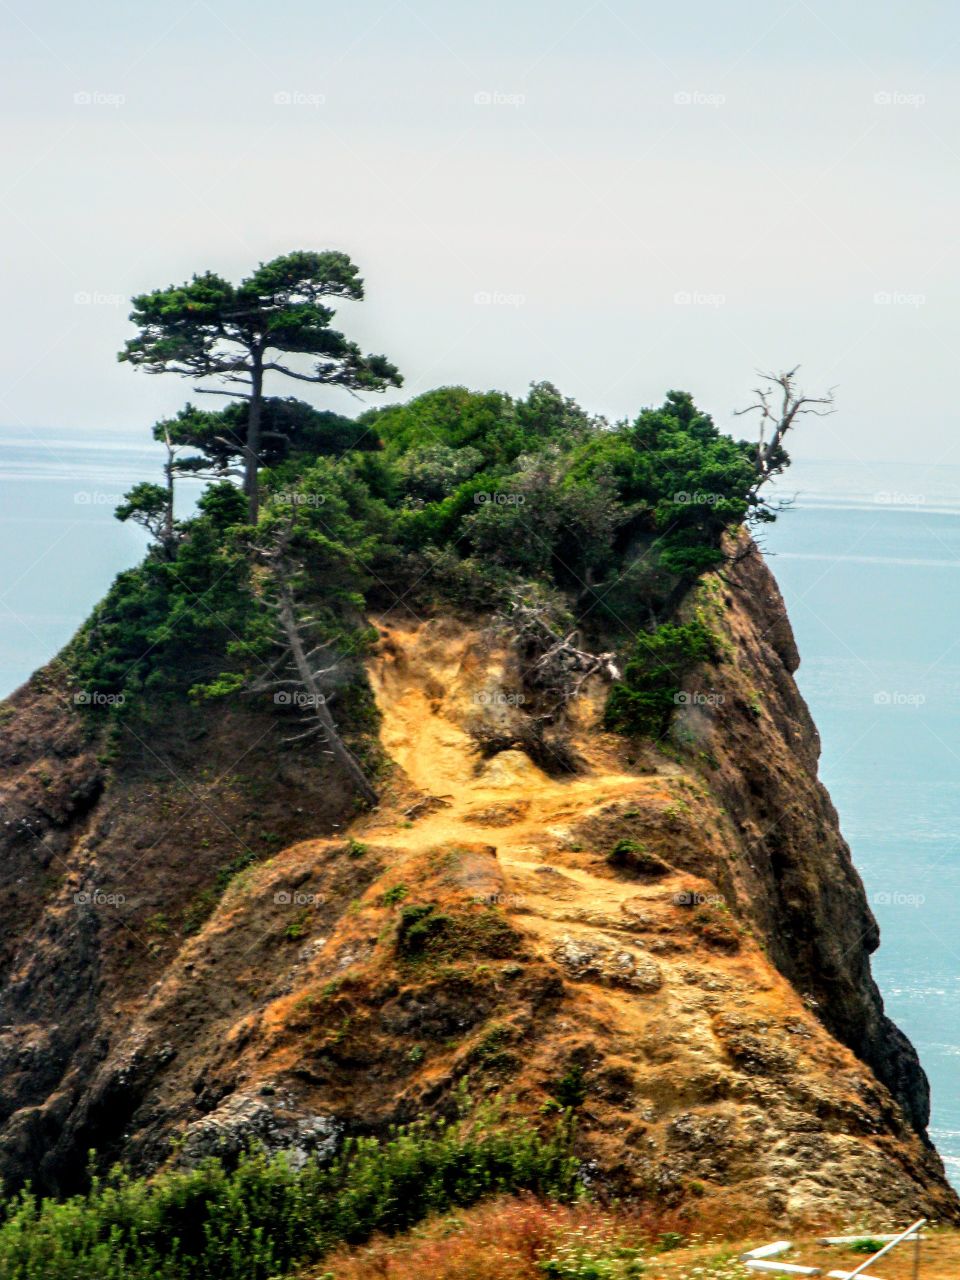 Nature Prevails on this Cliff "Nature at Her Best"